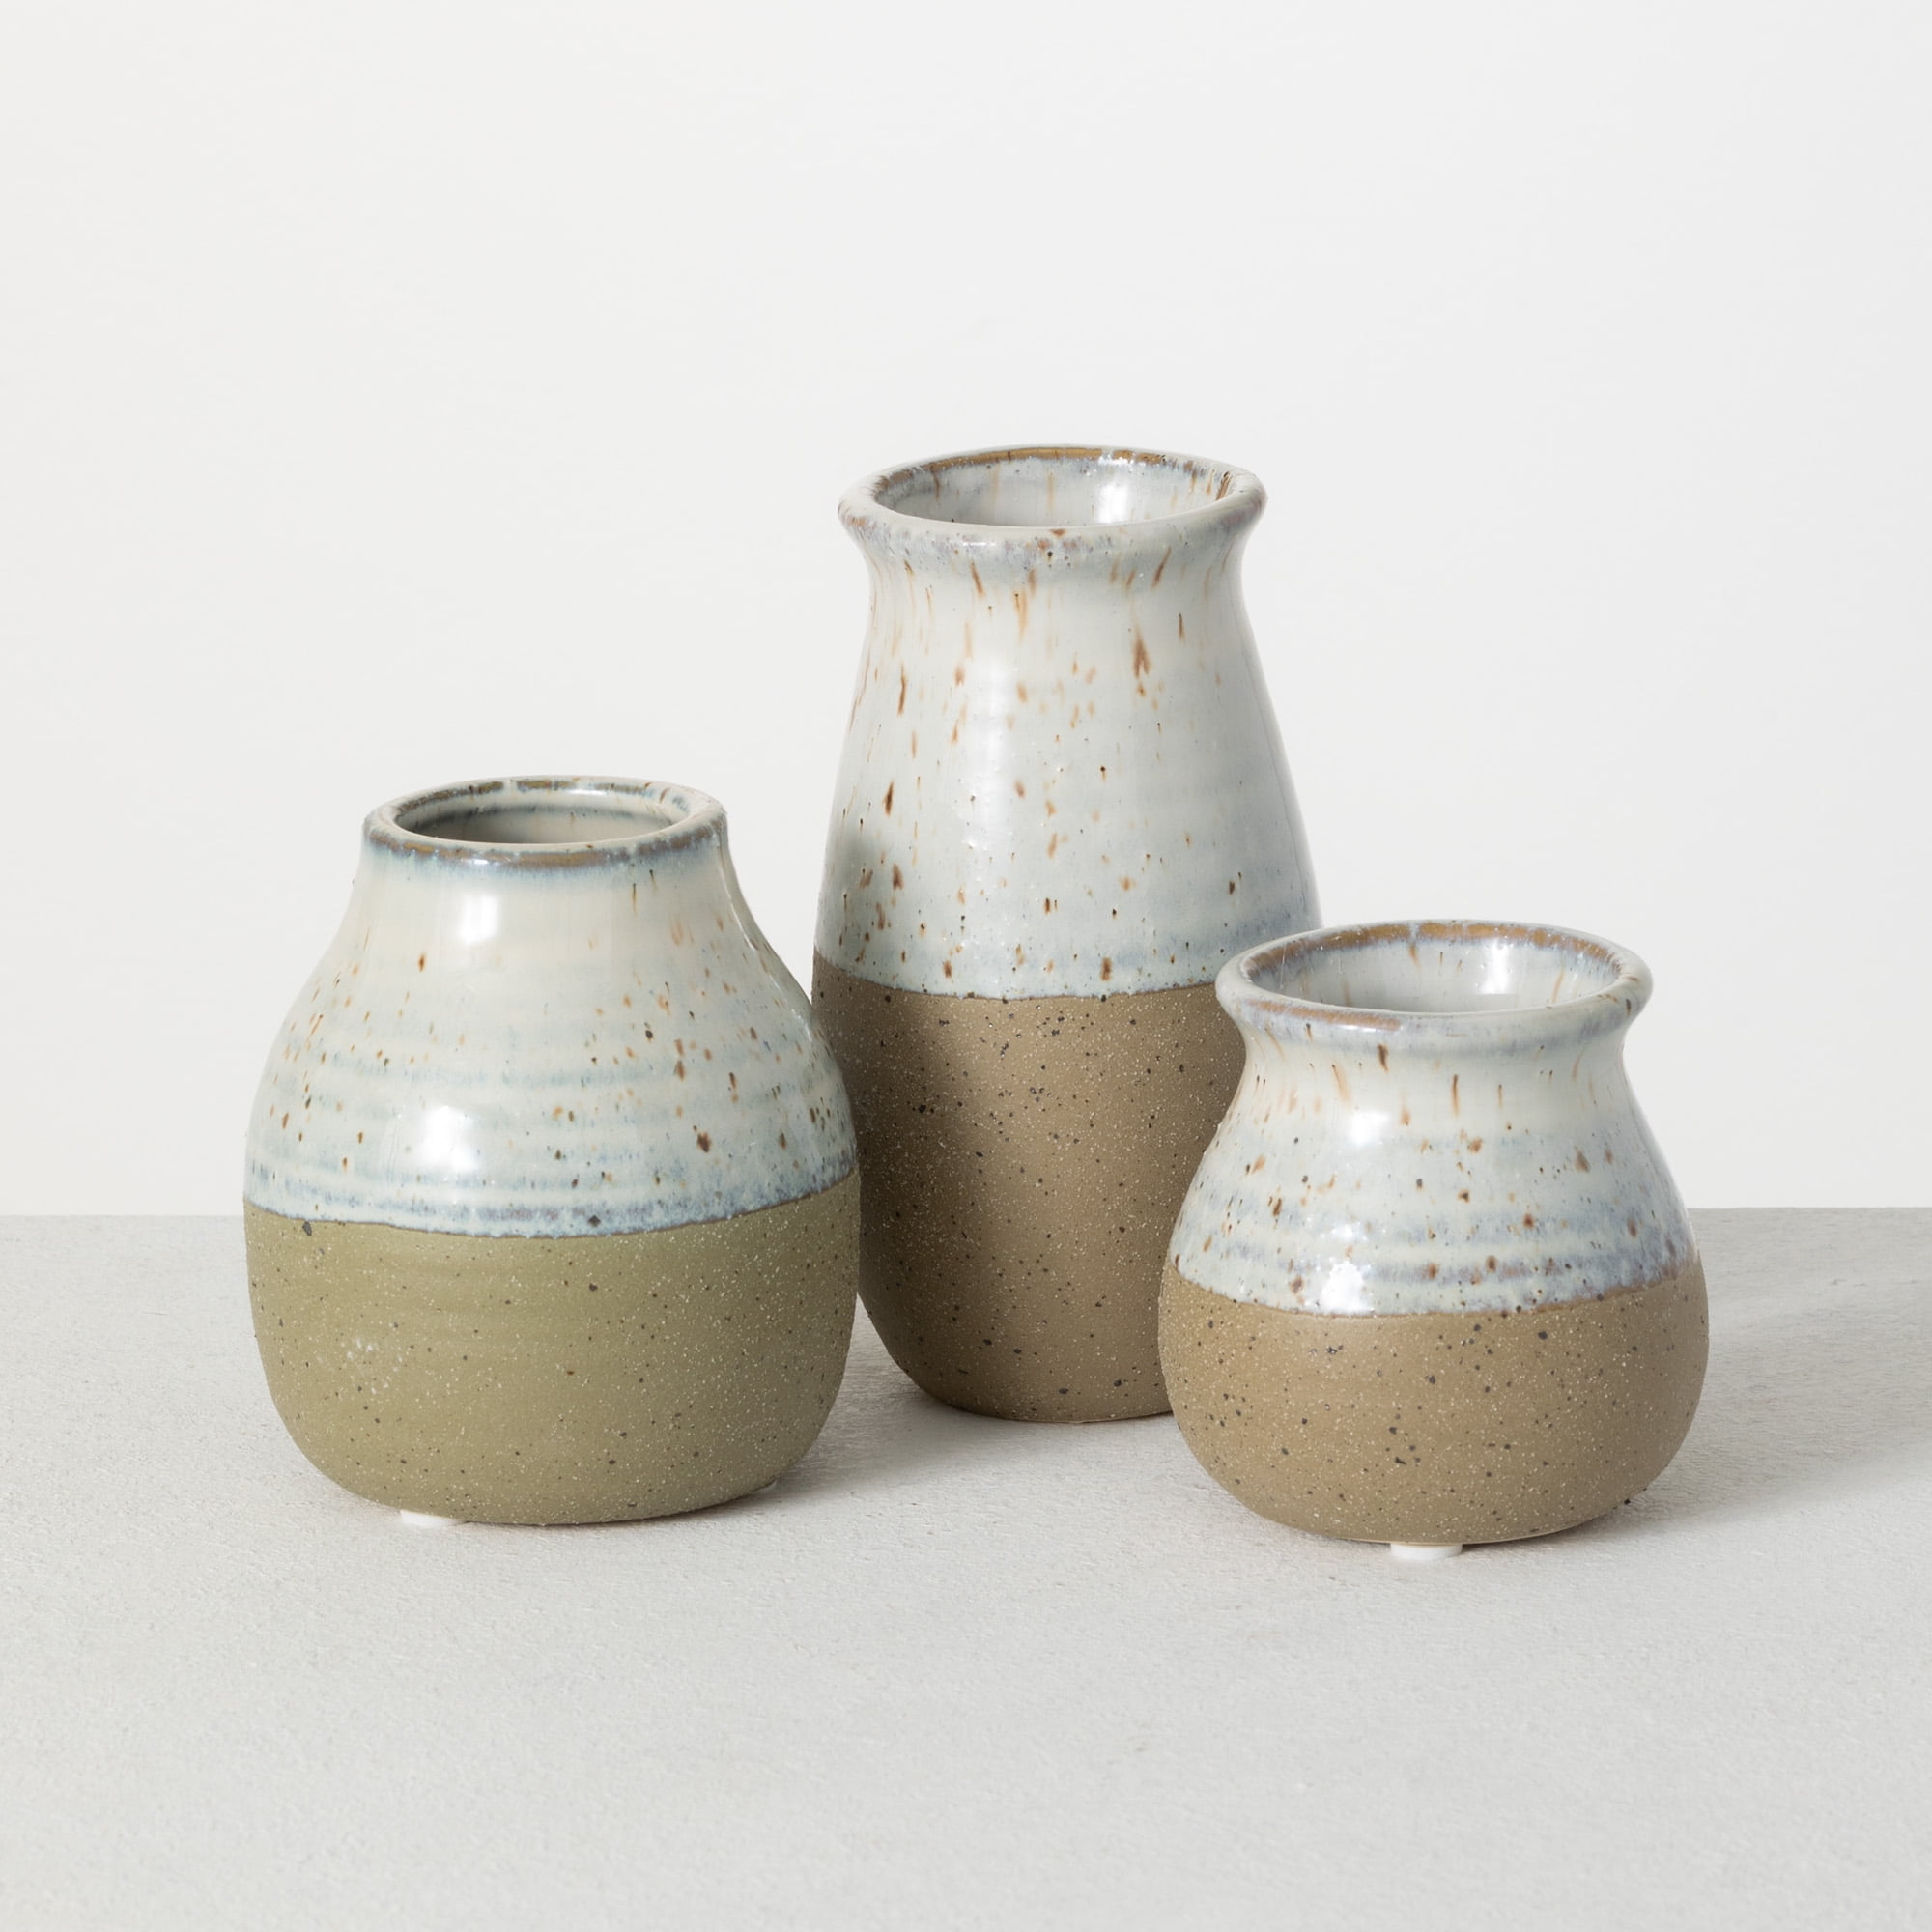 Rustic Home Decor Distressed White Set of 3 Vases Details about   Small White Vase Set Ceramic 